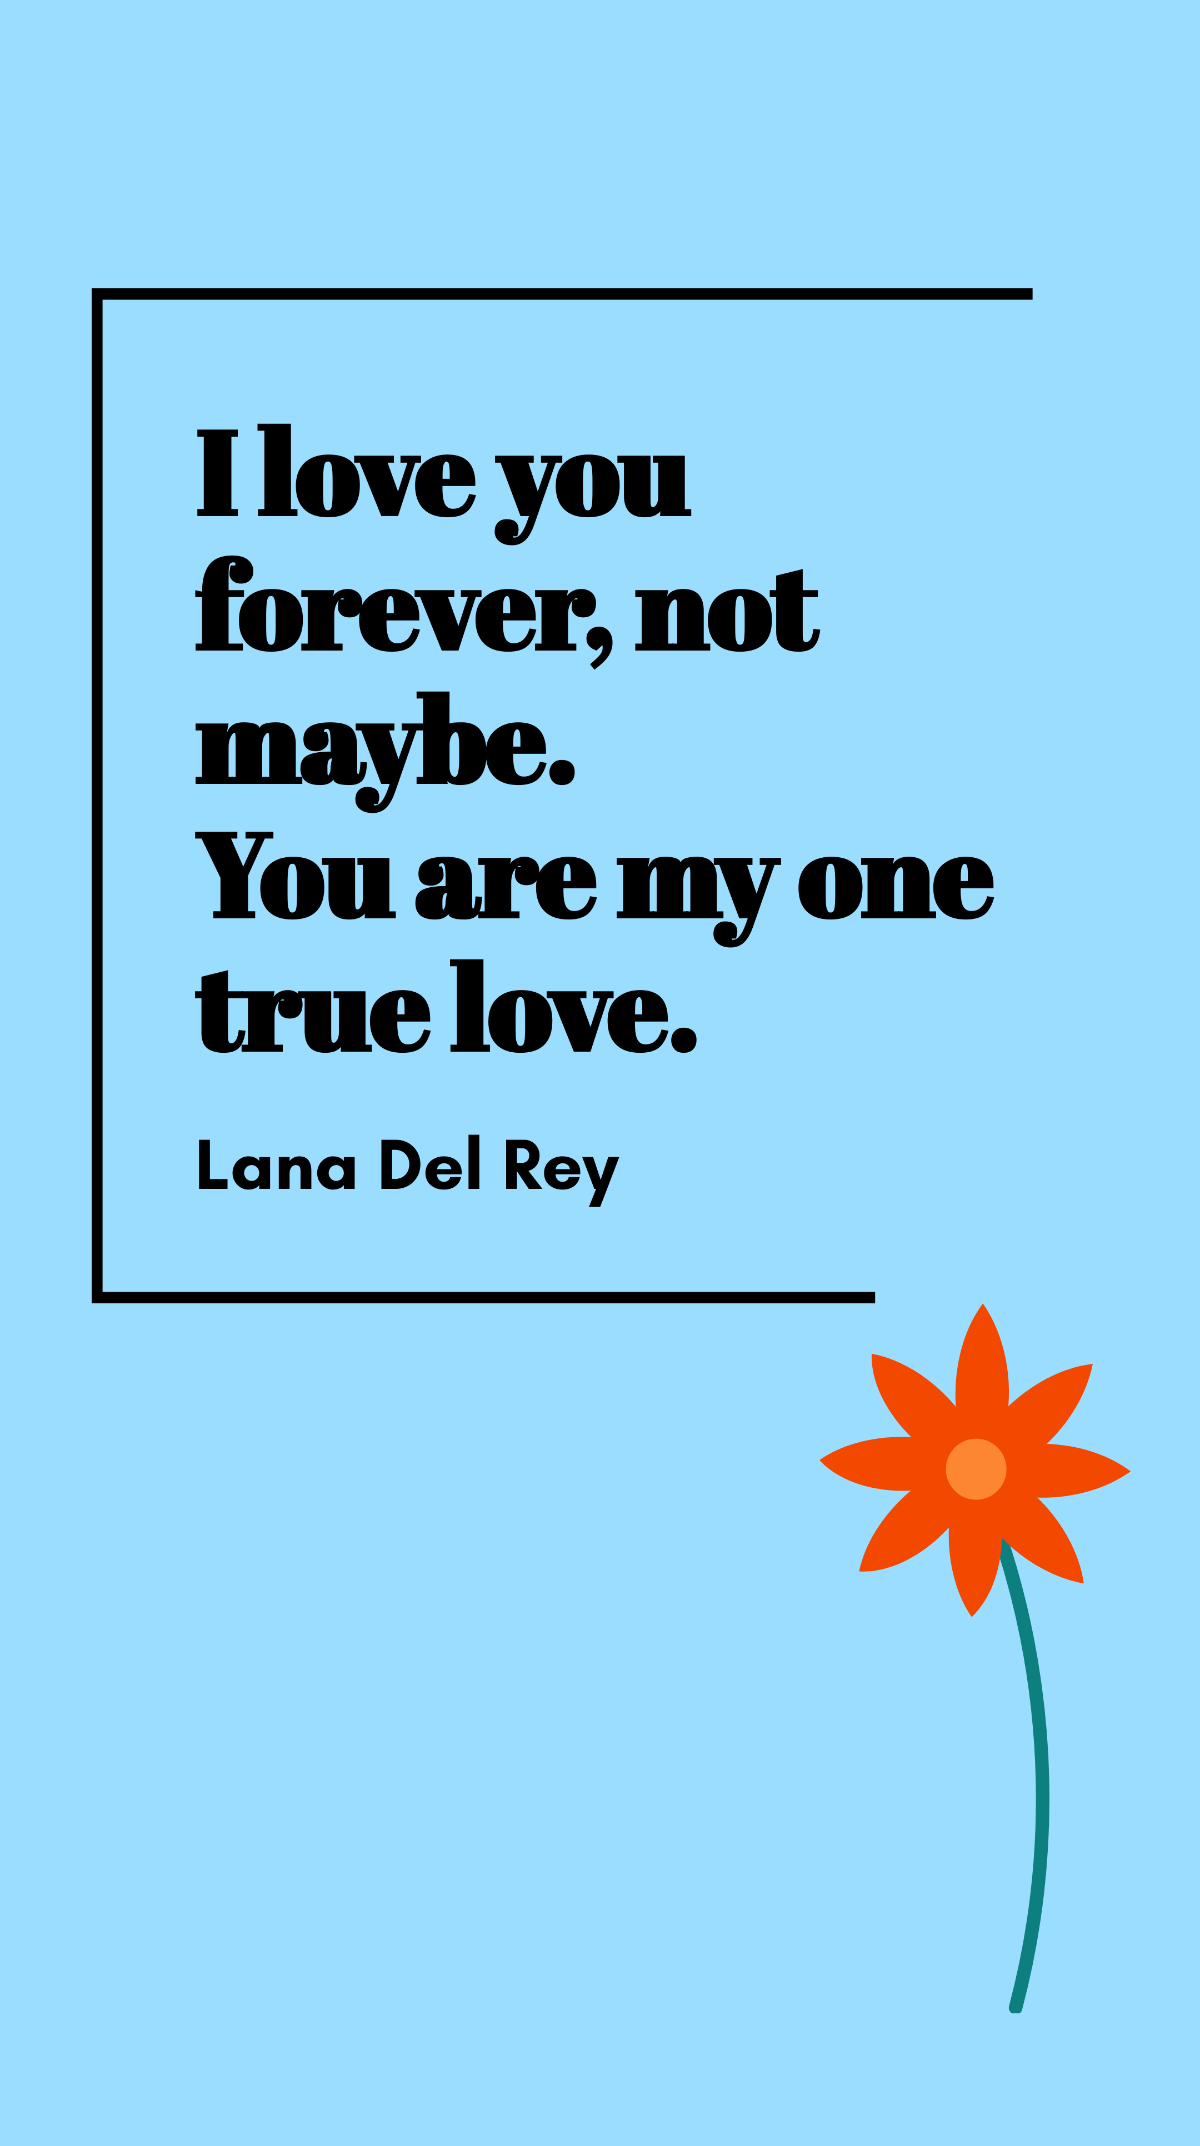 Lana Del Rey - I love you forever, not maybe. You are my one true love. Template